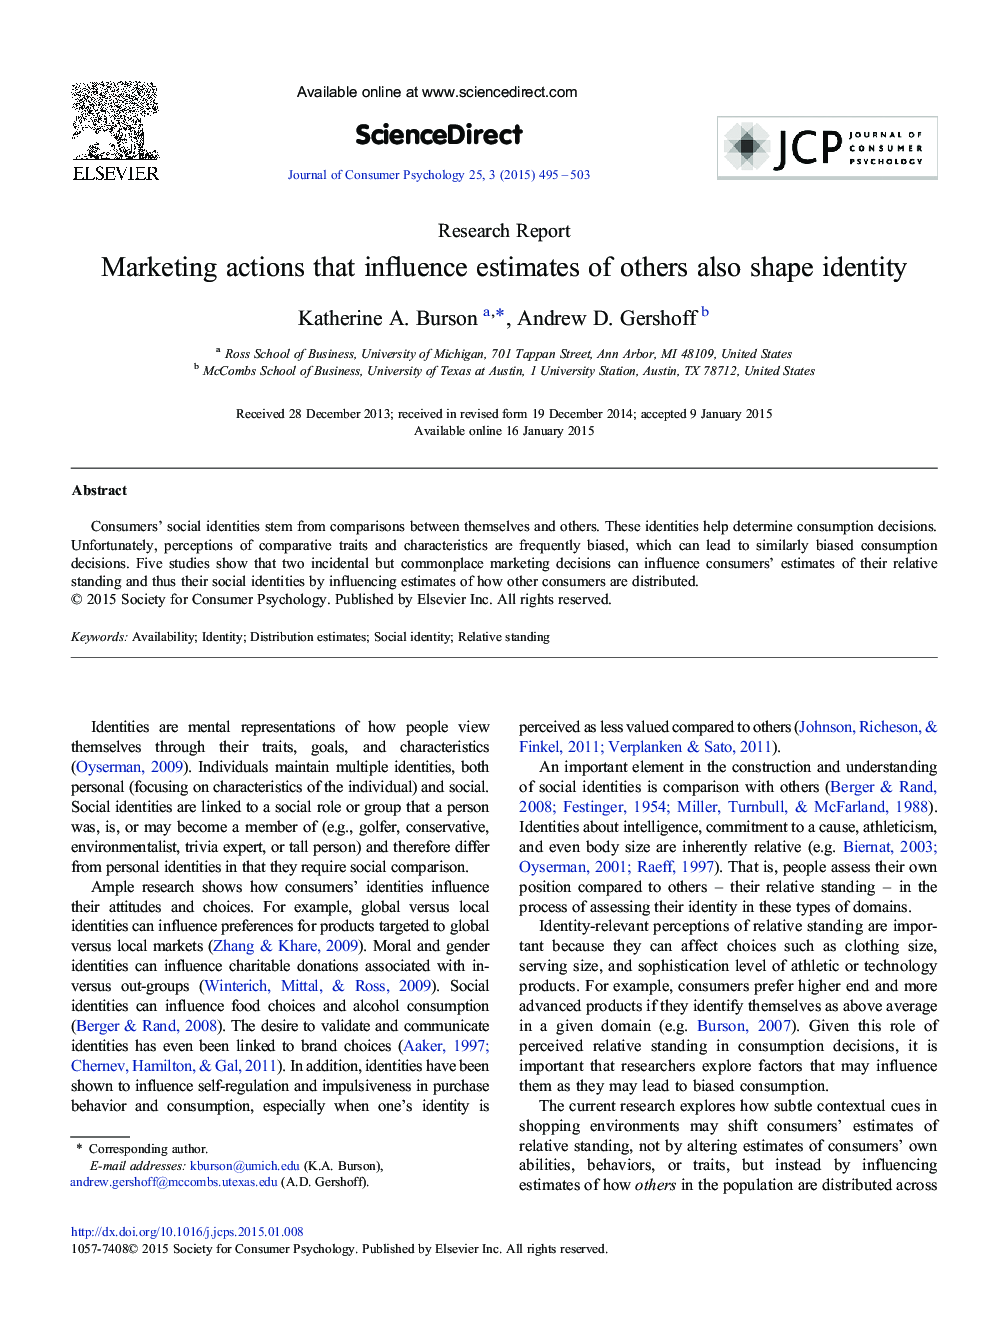 Marketing actions that influence estimates of others also shape identity